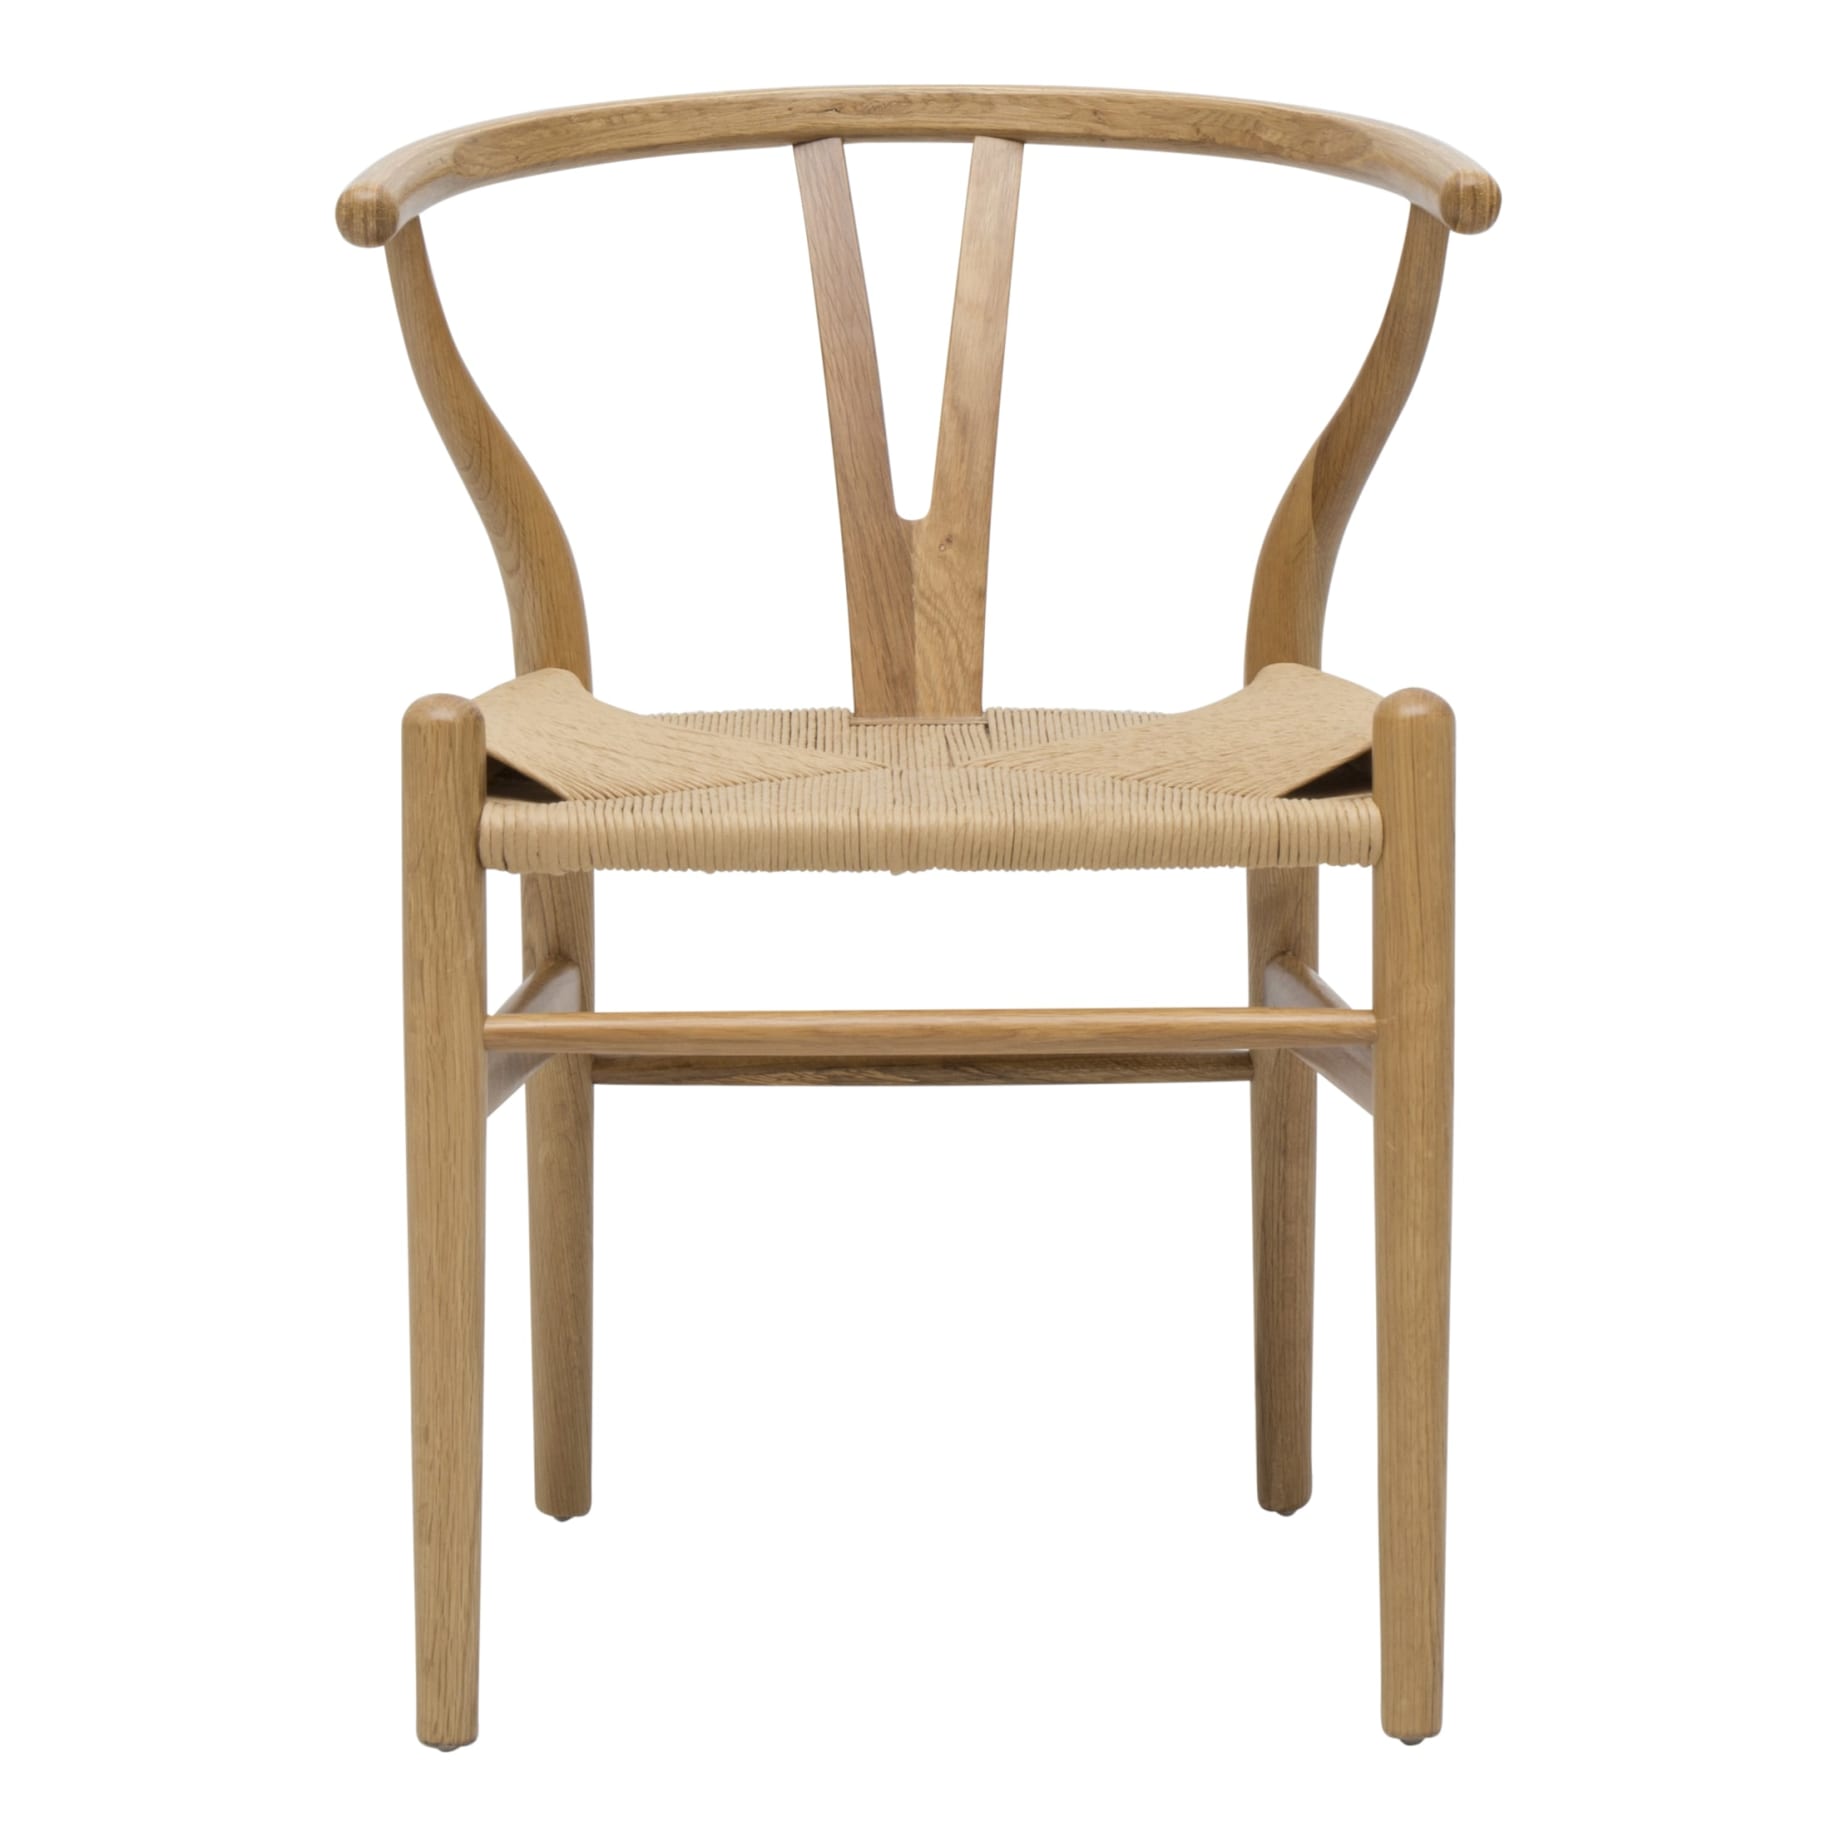 Megs Wishbone Dining Chair in Oak / Natural Seat